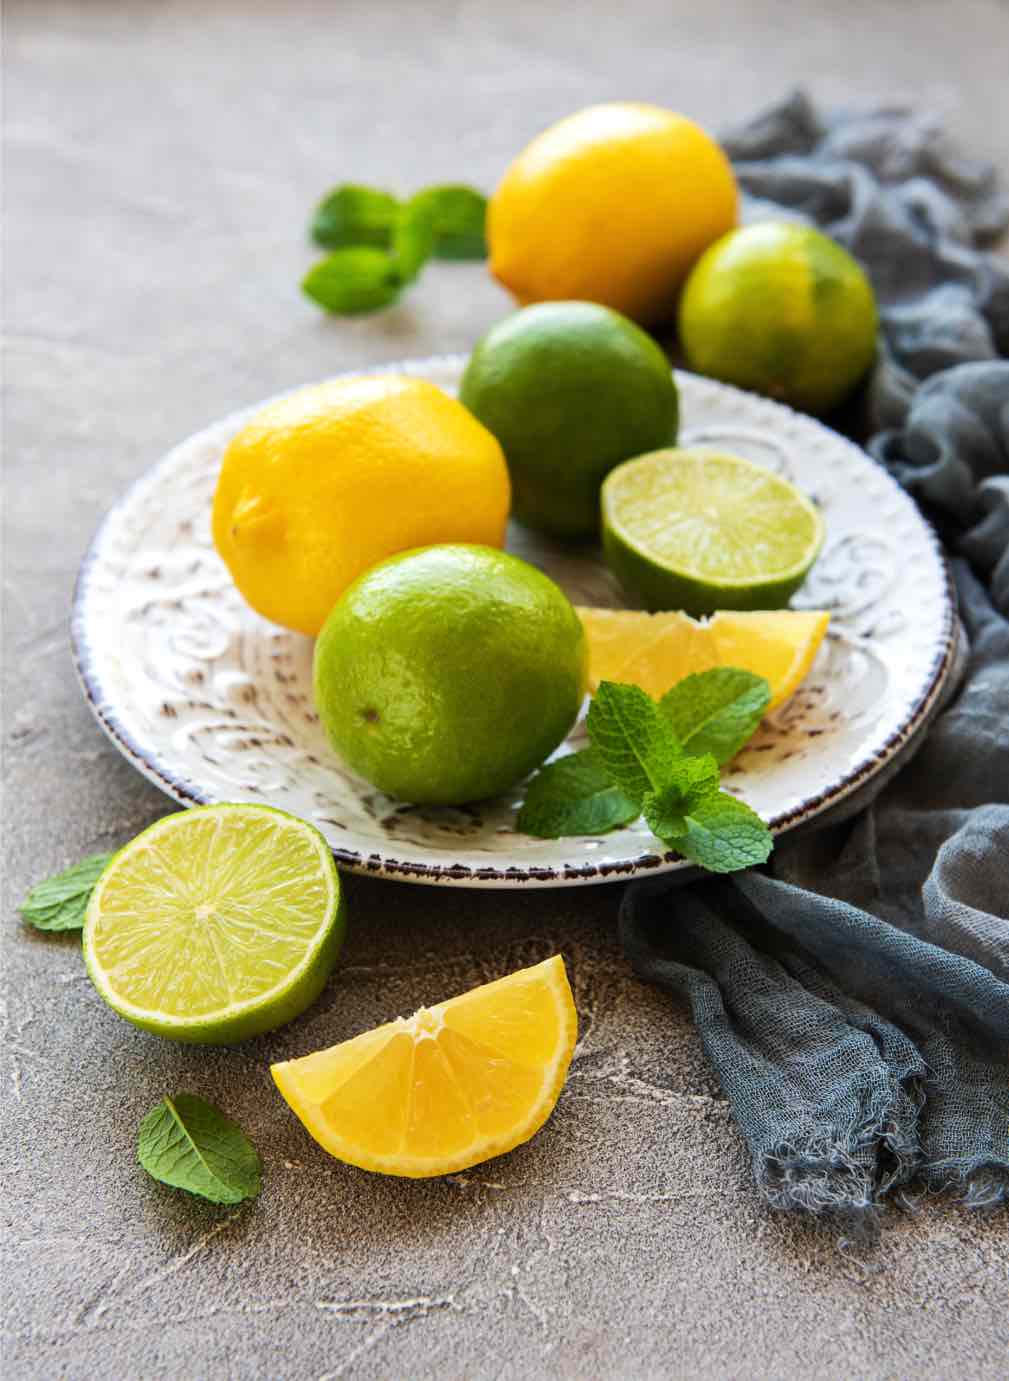 Lemons and limes are great for humans, but not for dogs - learn more with Dog Training Elite Northern Utah in Park City!